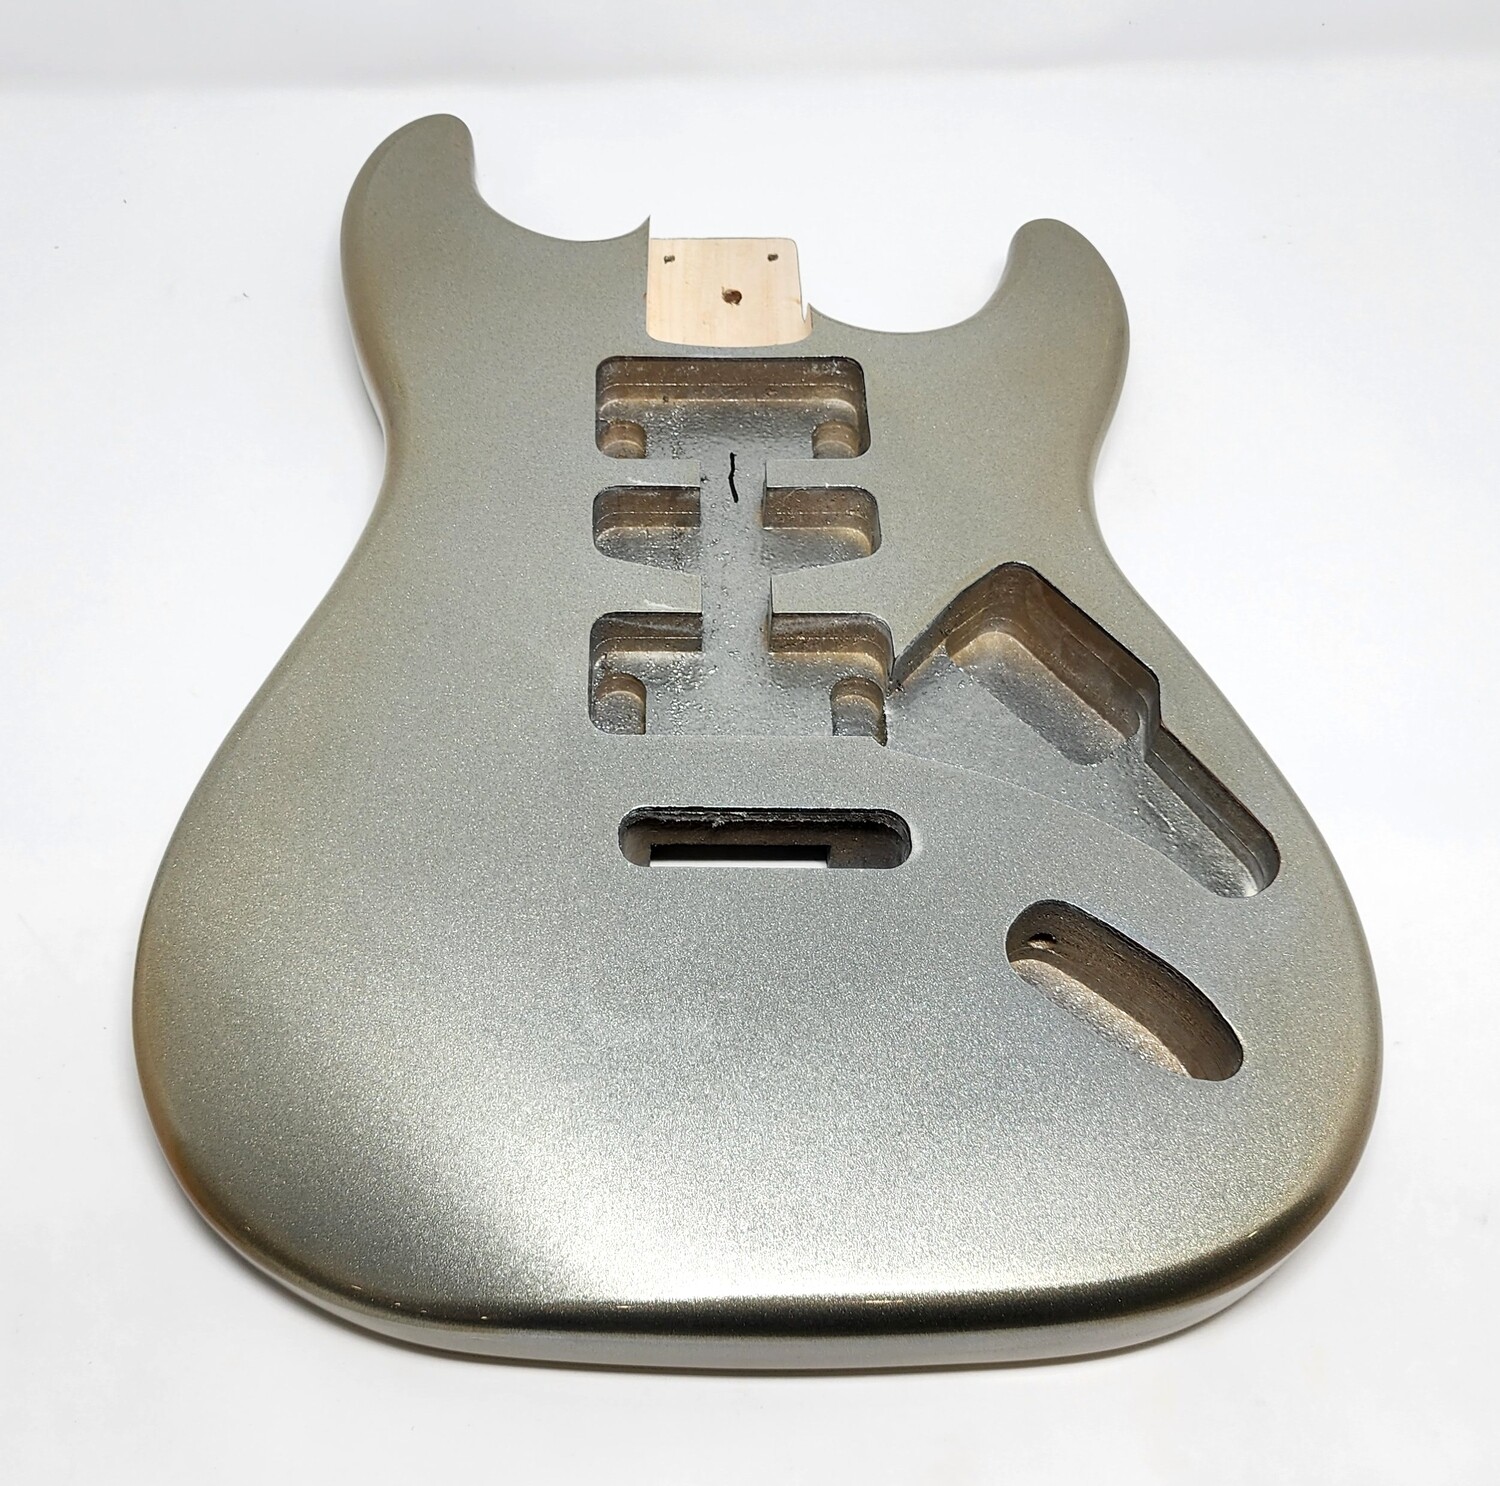 Brio HSH S-Style Body made for 57mm Wide (Charvel) Neck - Metallic Silvery Goldie Gloss